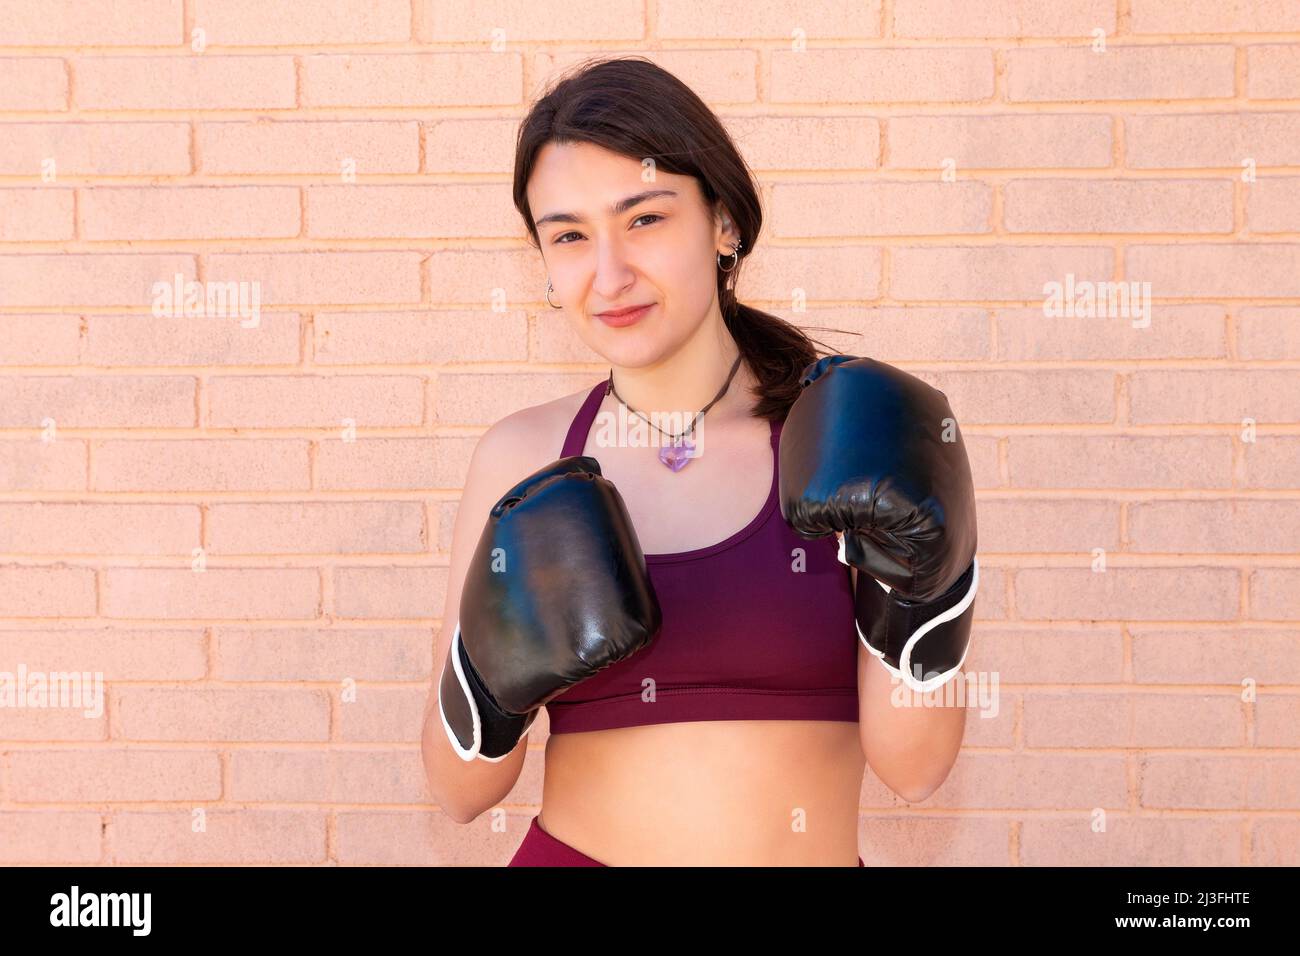 A young Caucasian woman wearing black boxing gloves has her arms flexed with her fists close to her chest. in the background is a brick wall. Stock Photo